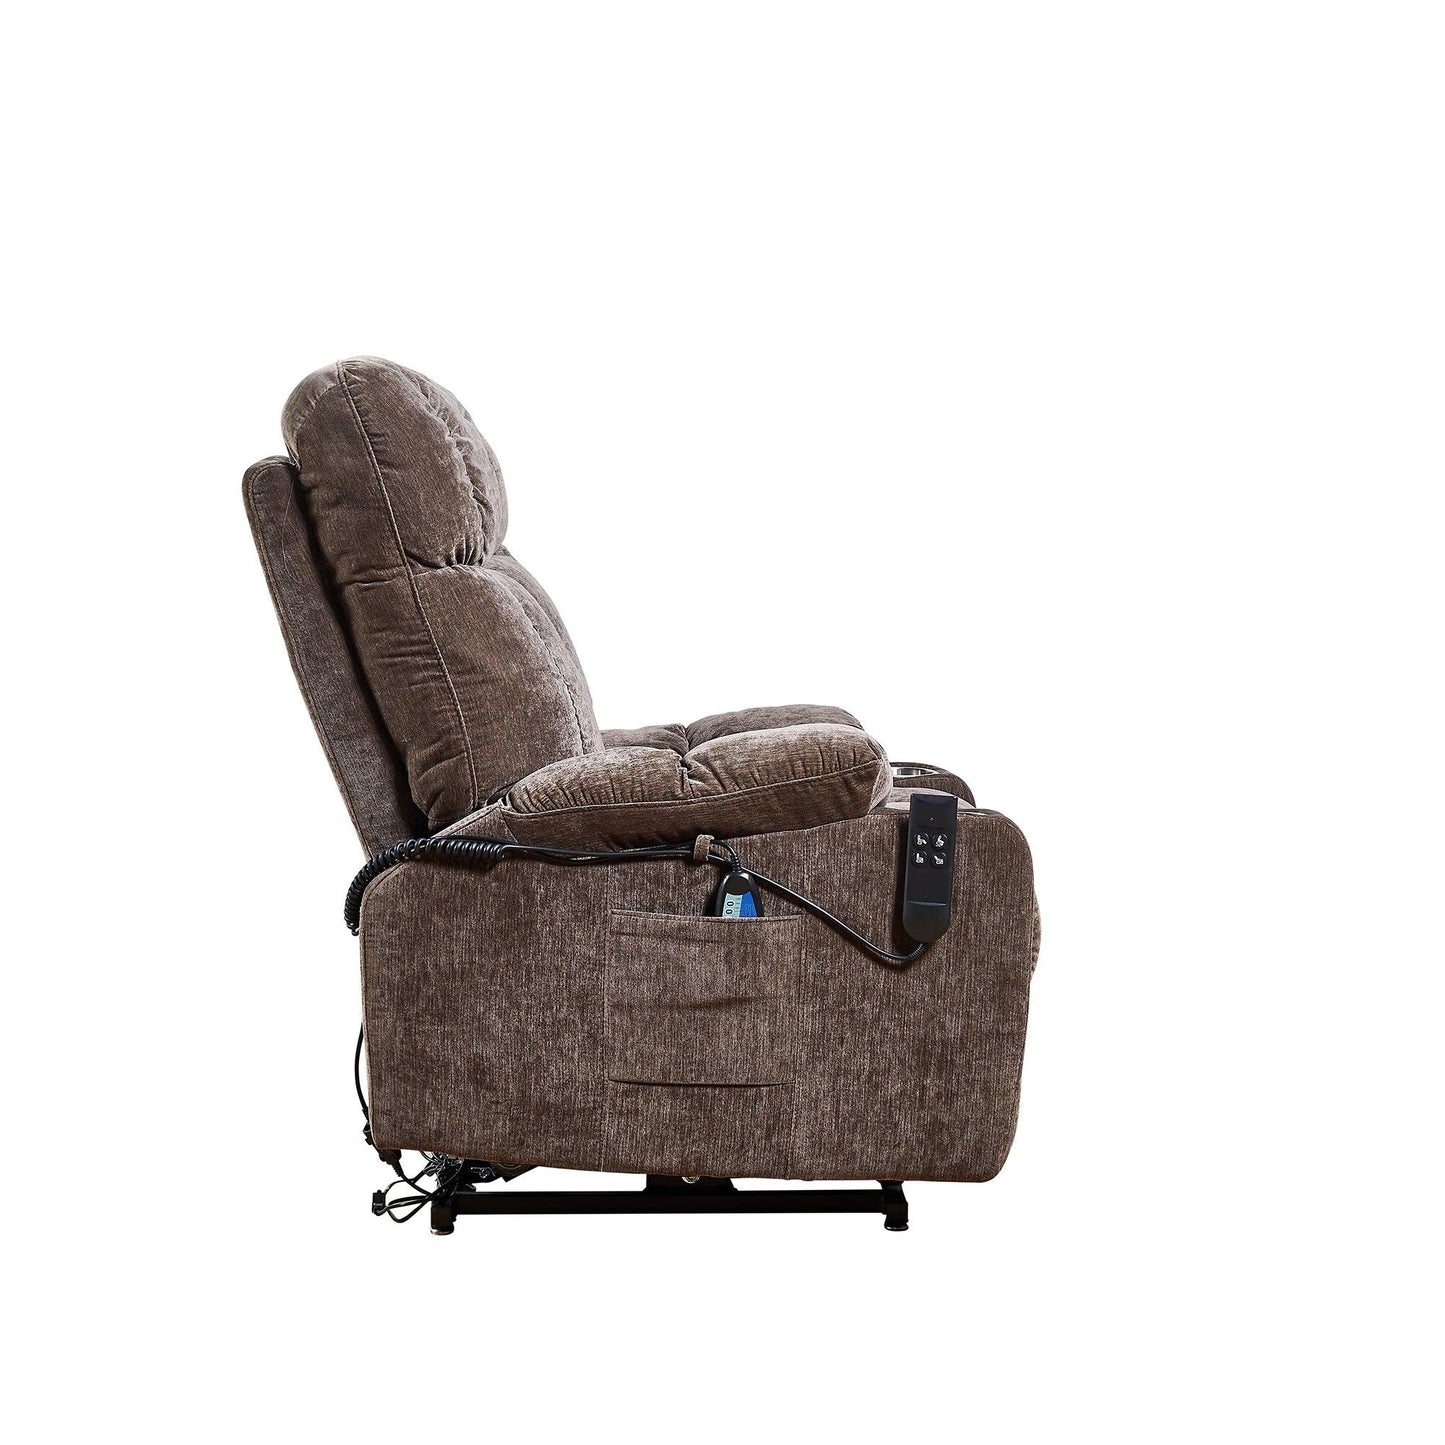 Electric Power Lift Recliner Chair with Massage, Heat, Phone Holder, and Integrated Cup Holders, Brown FredCo